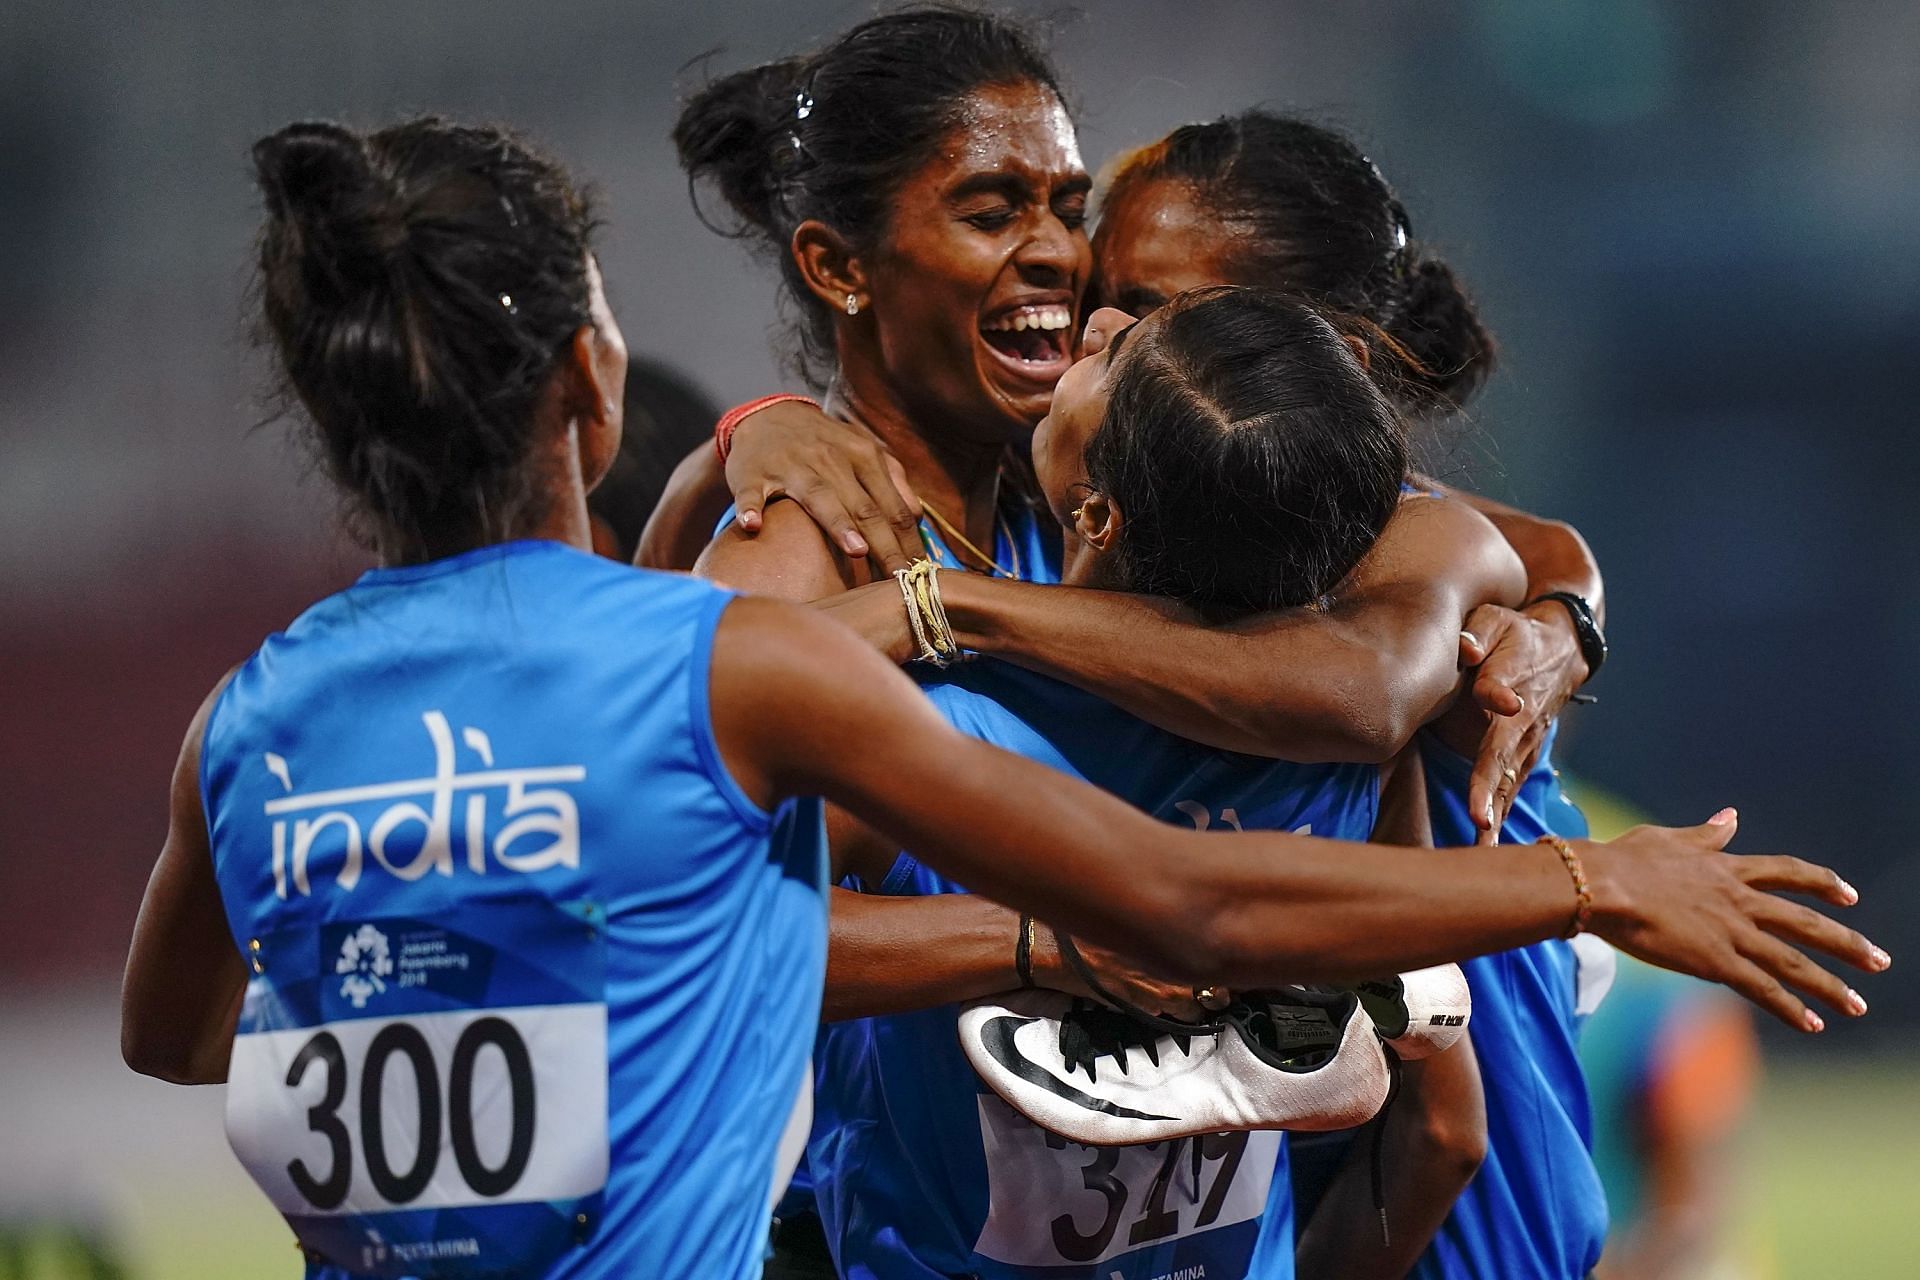 India won the 4x400 m gold at the Jakarta Asian Games in 2018 (Getty Images)